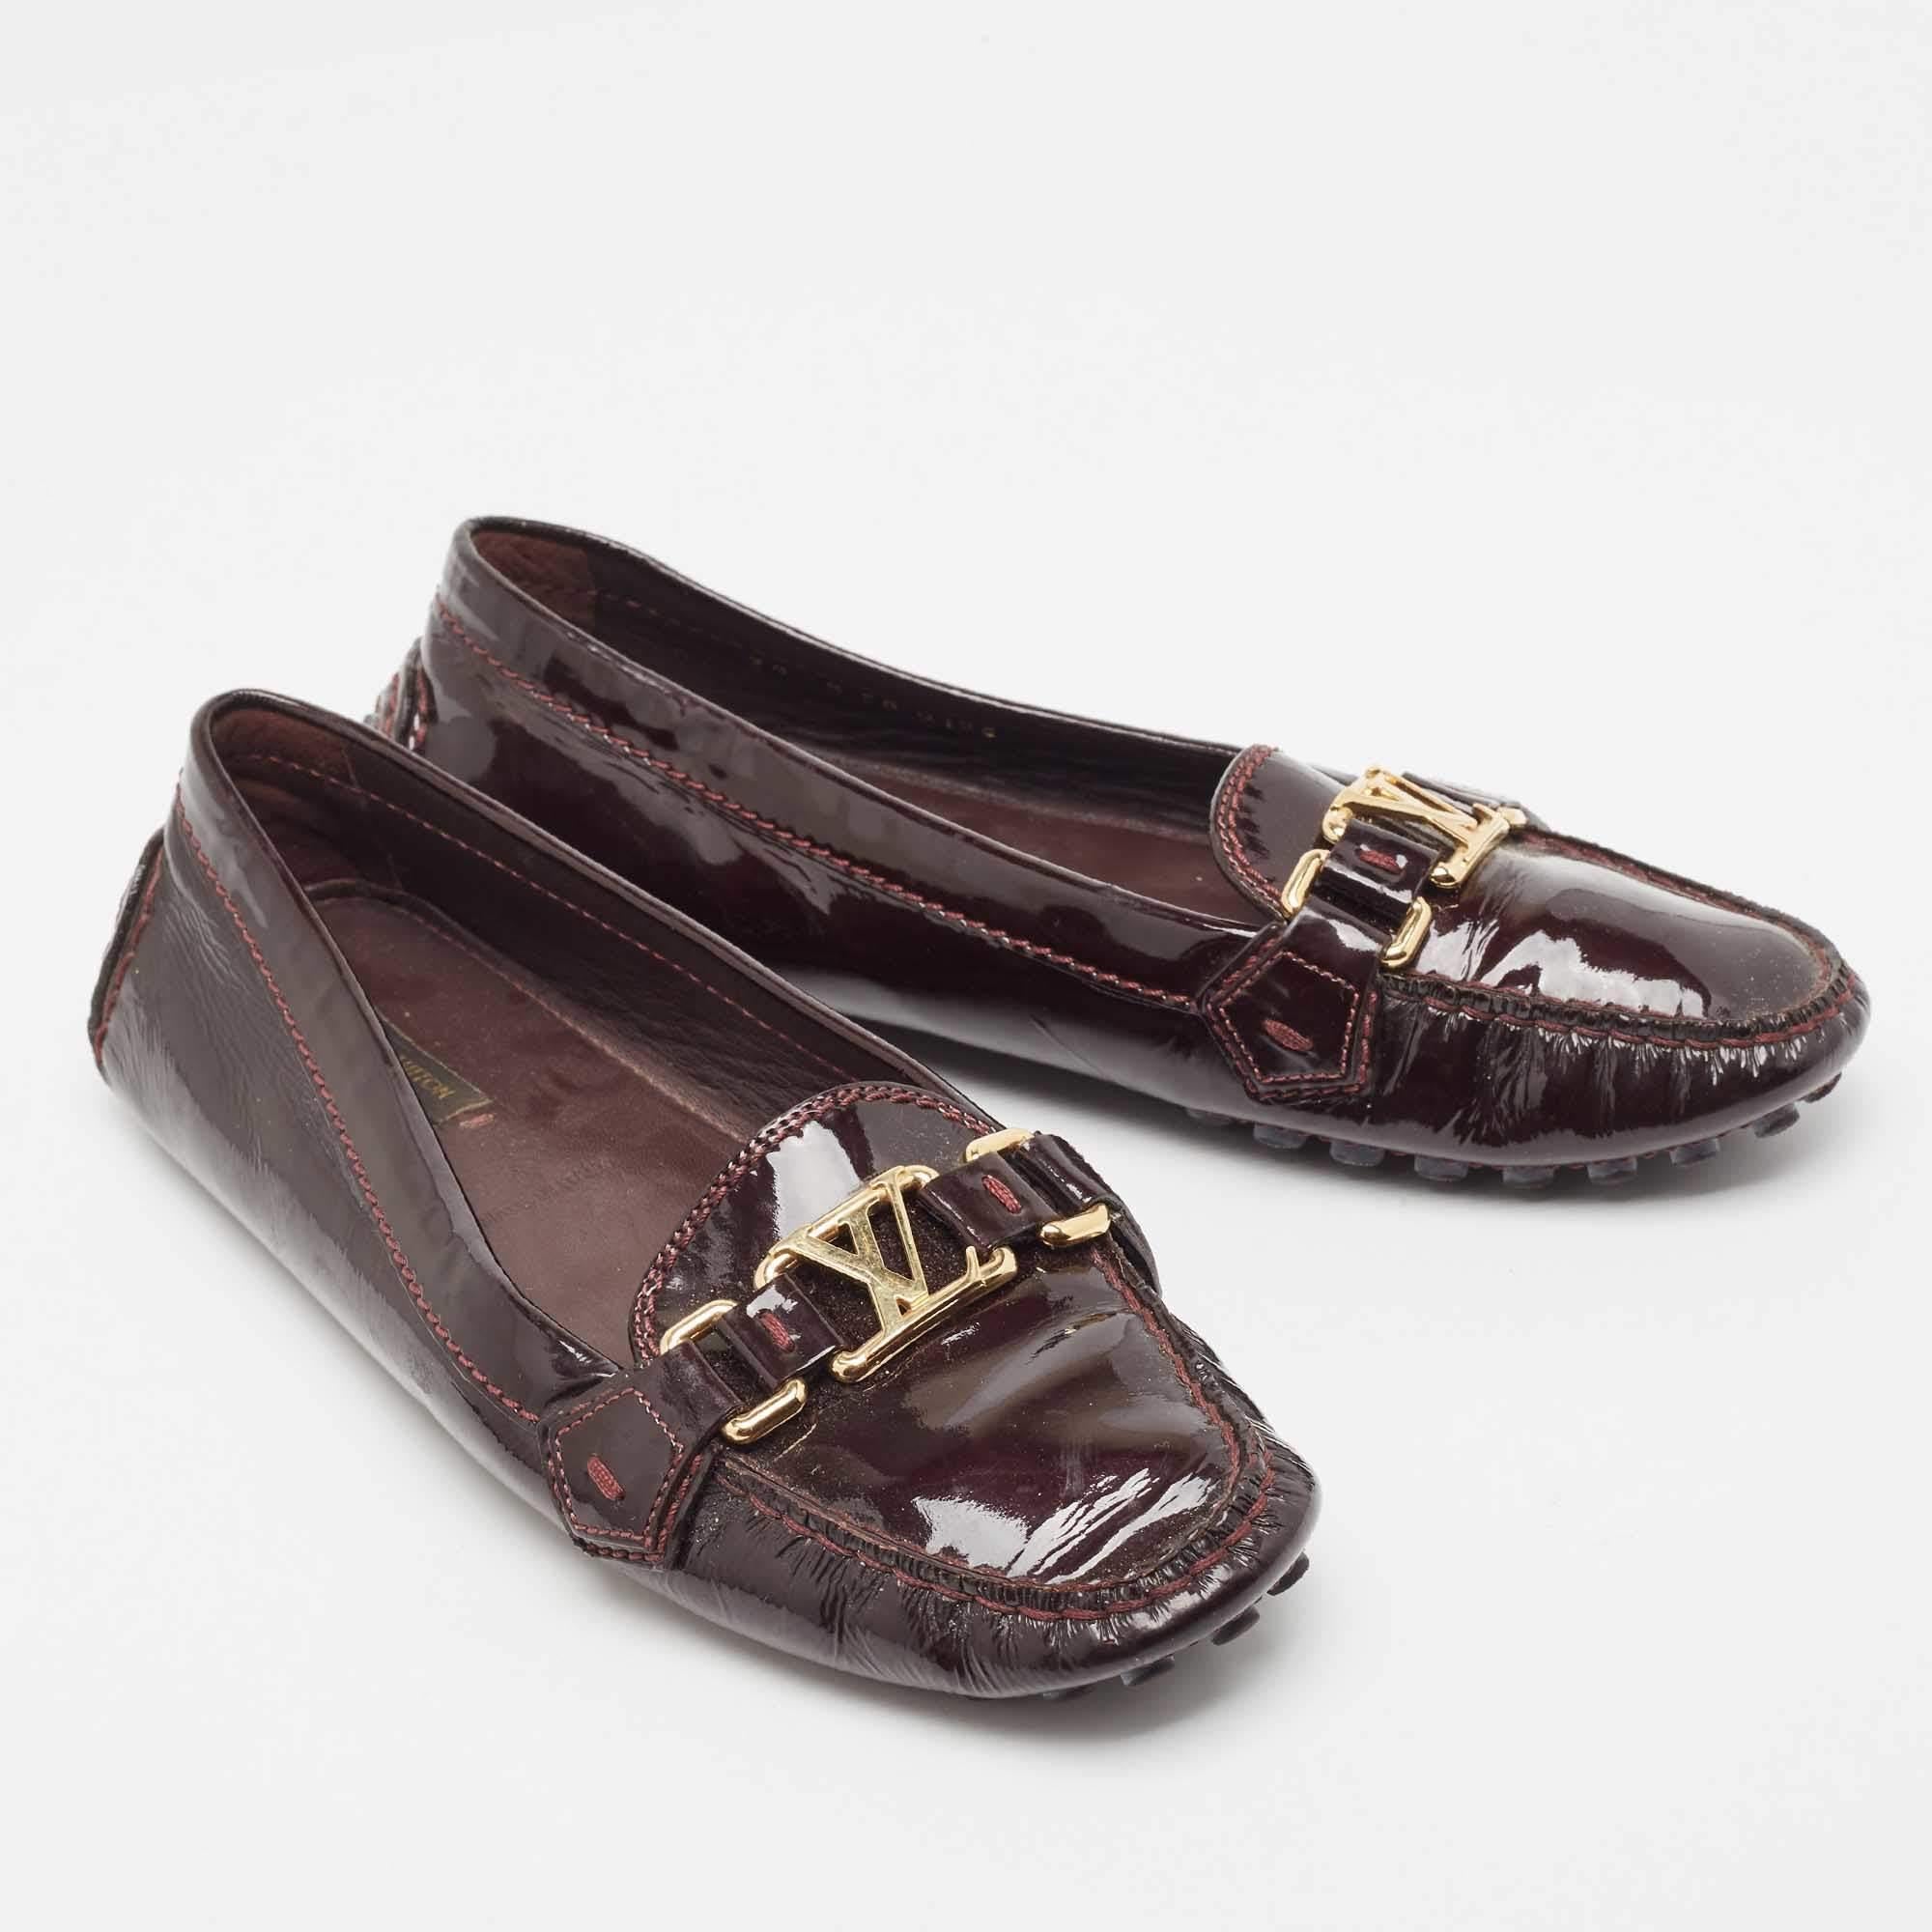 Louis Vuitton Burgundy Patent Leather Oxford Loafers Size 39 In Good Condition For Sale In Dubai, Al Qouz 2